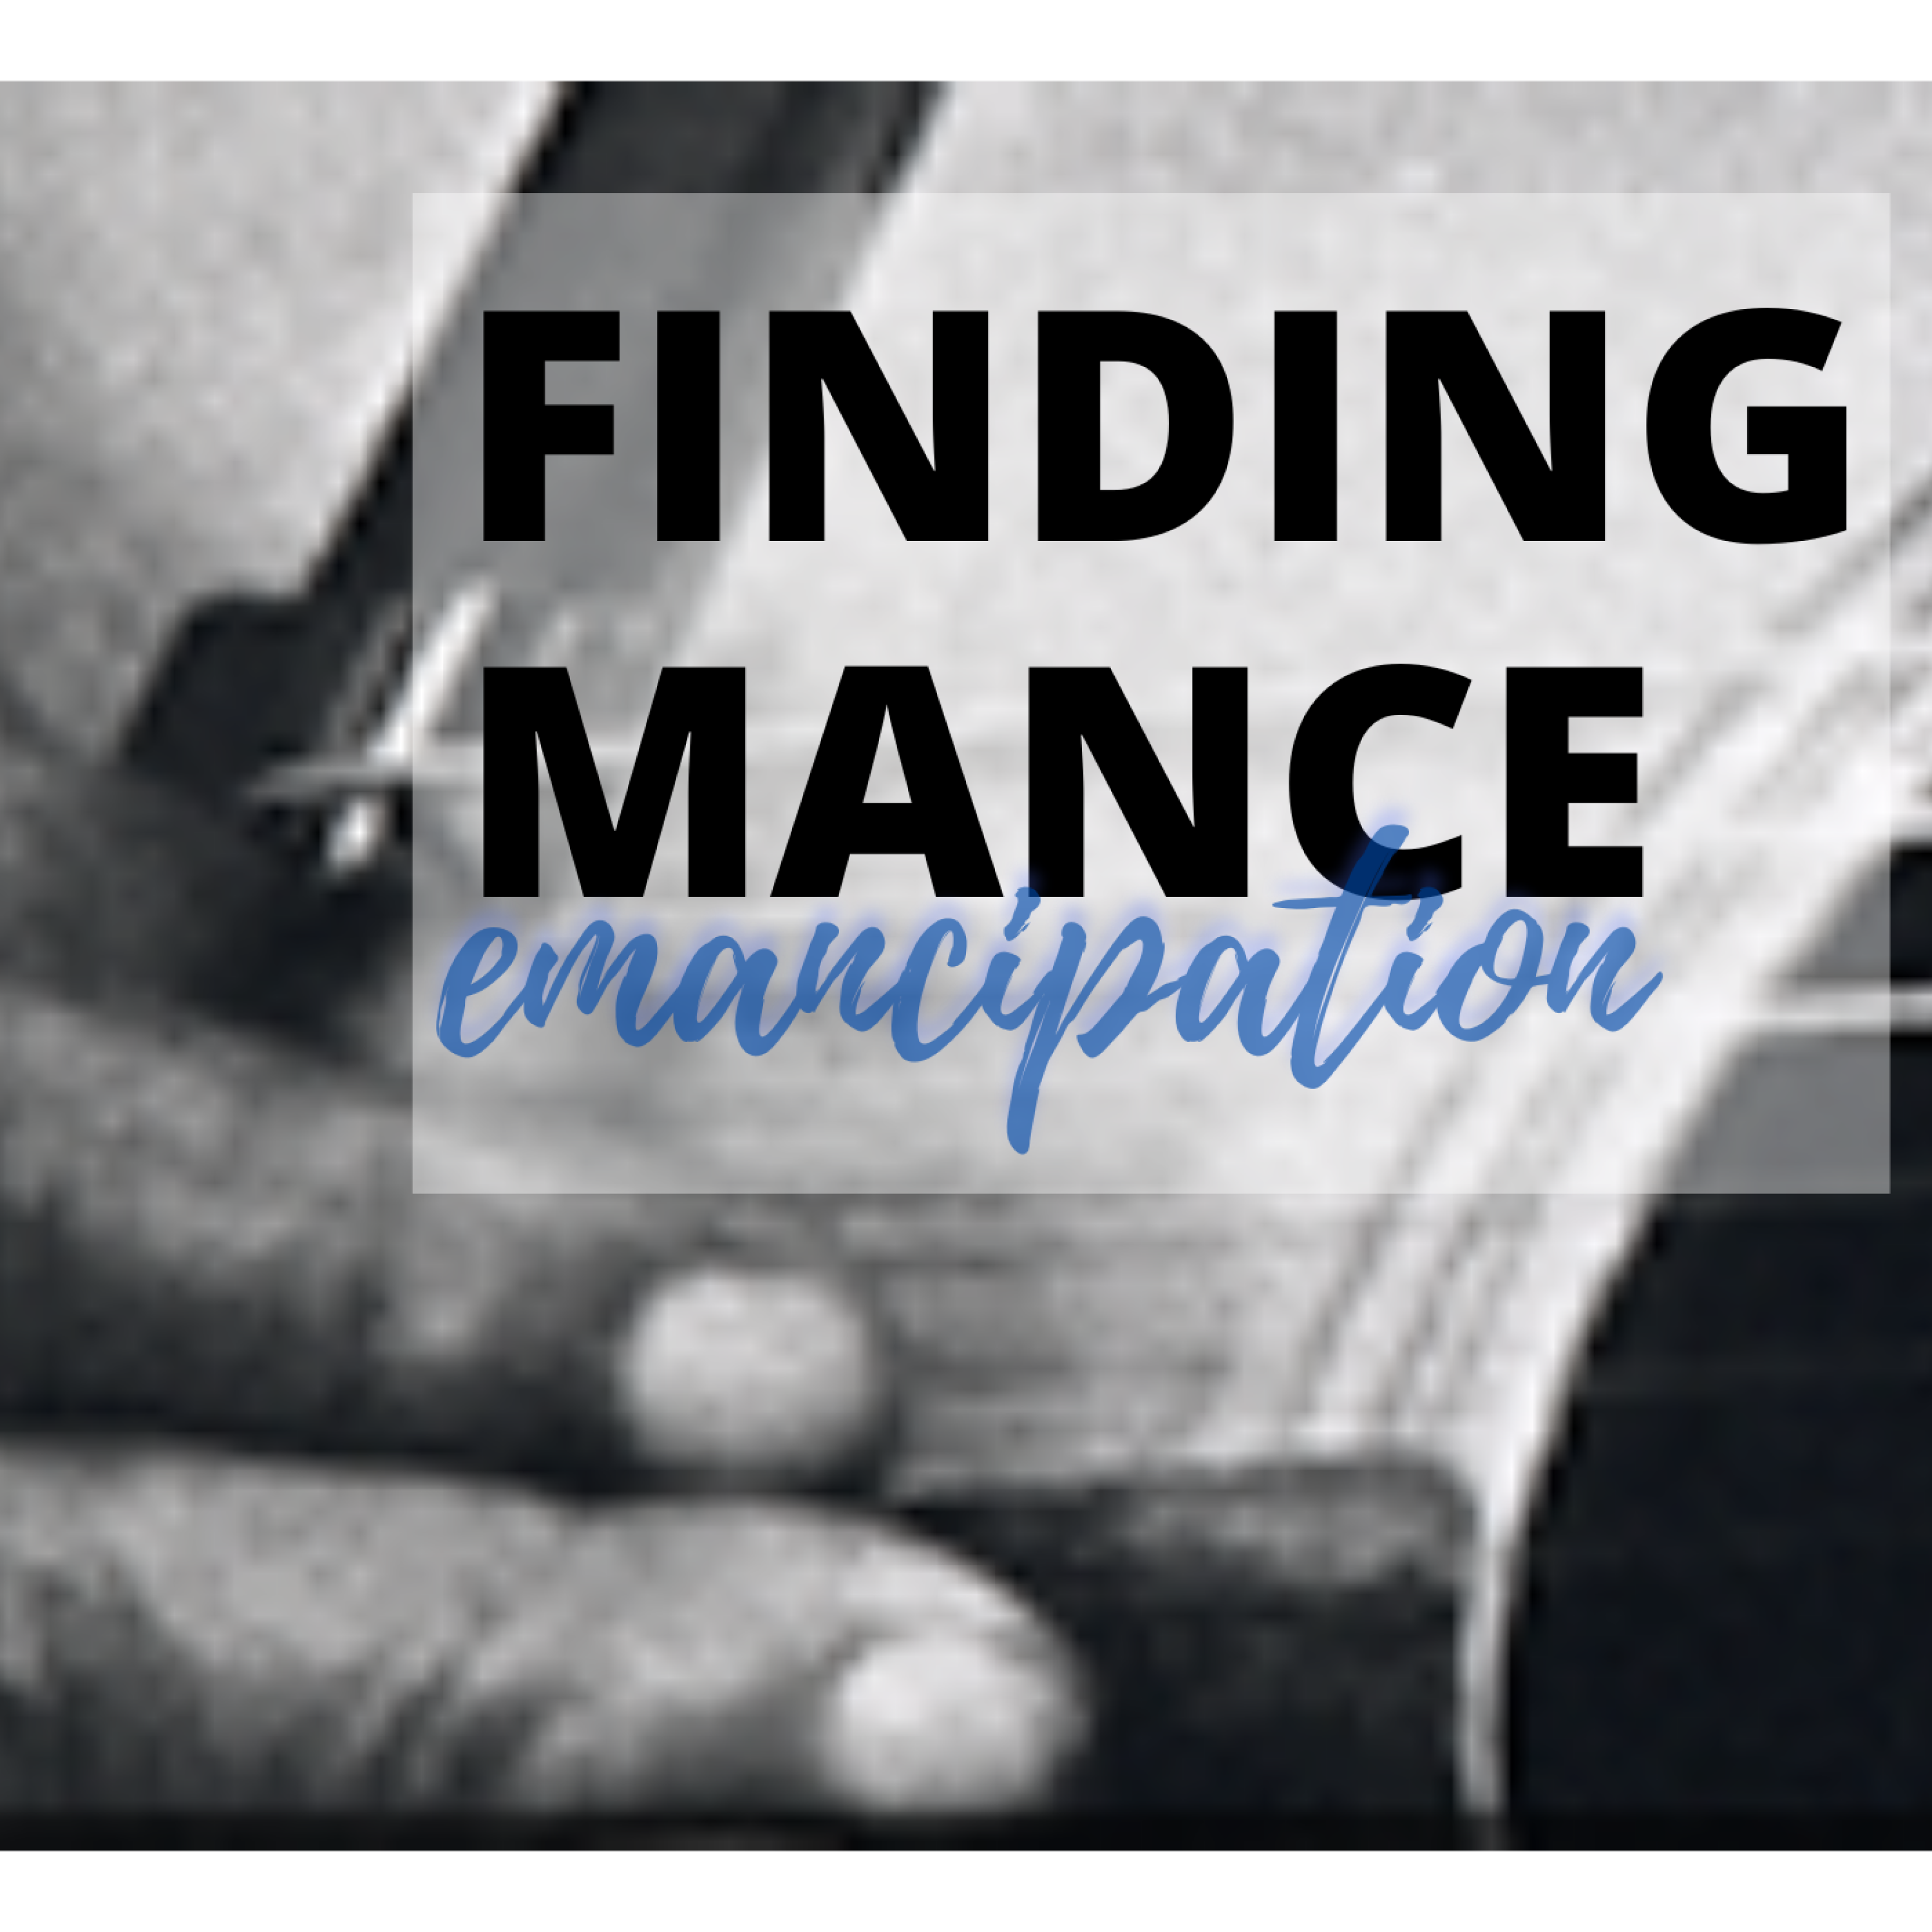 Finding Mance